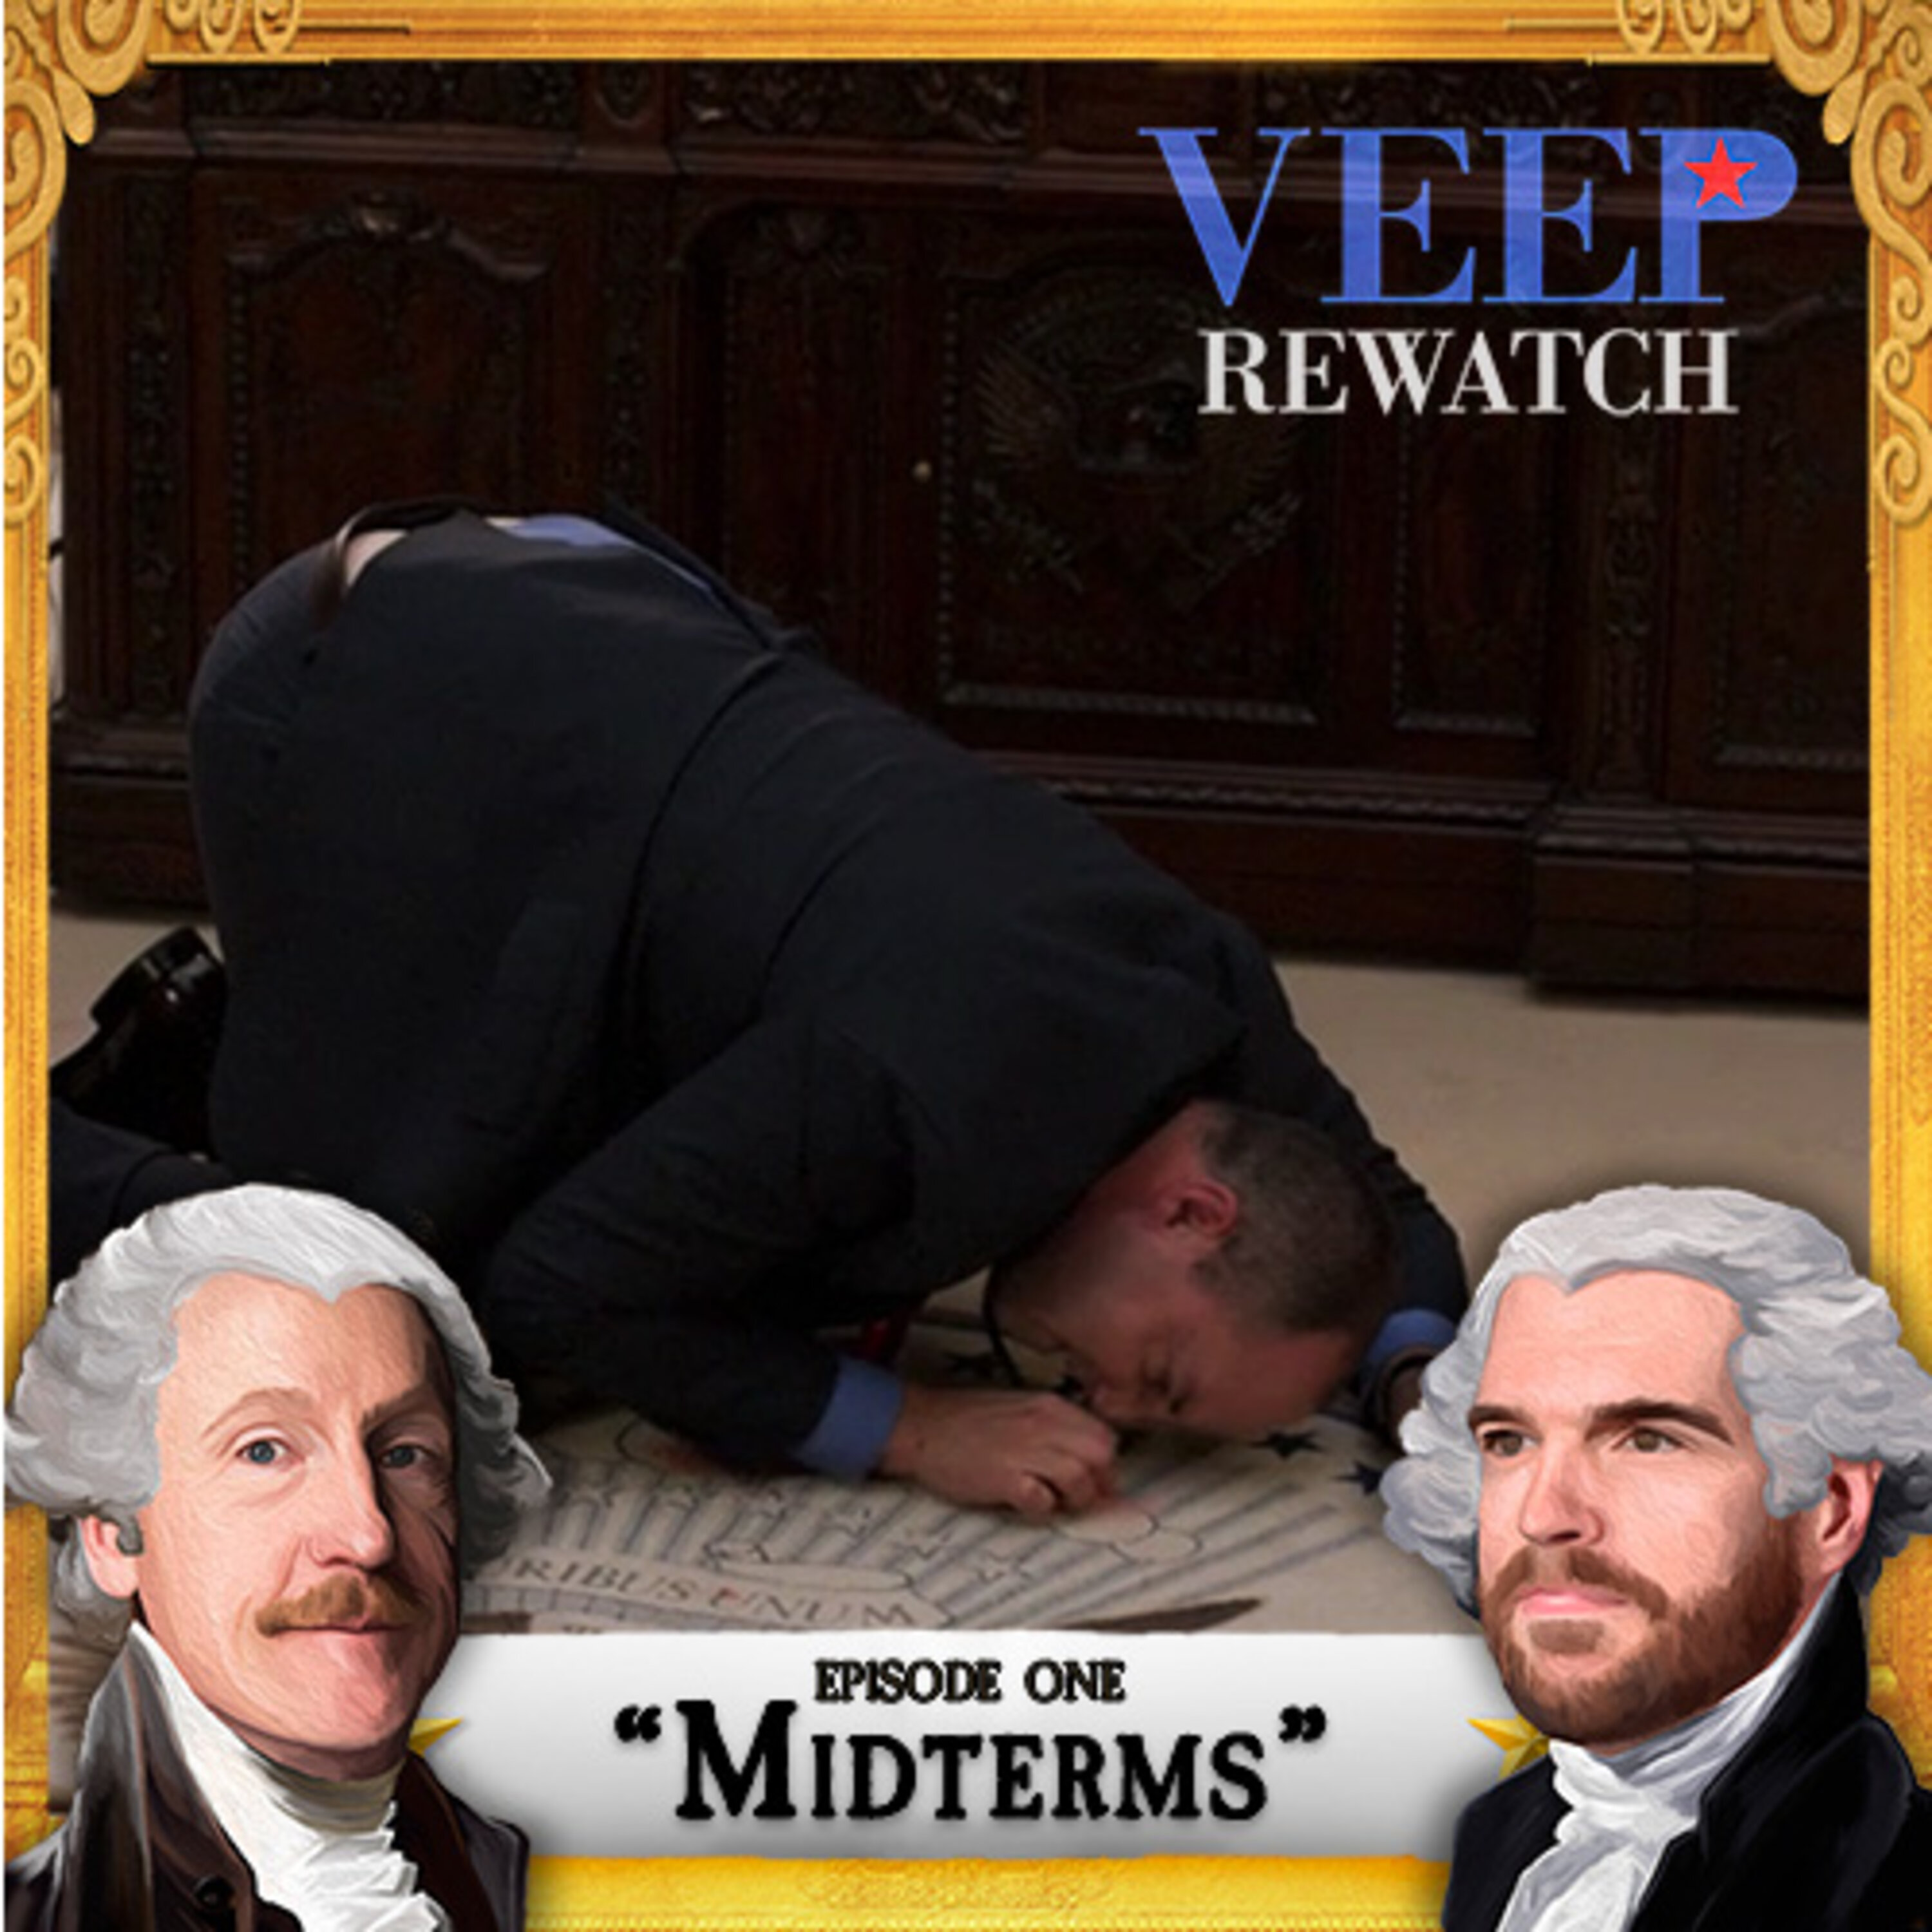 “Midterms” (S2E1) Veep Rewatch with Matt and Tim